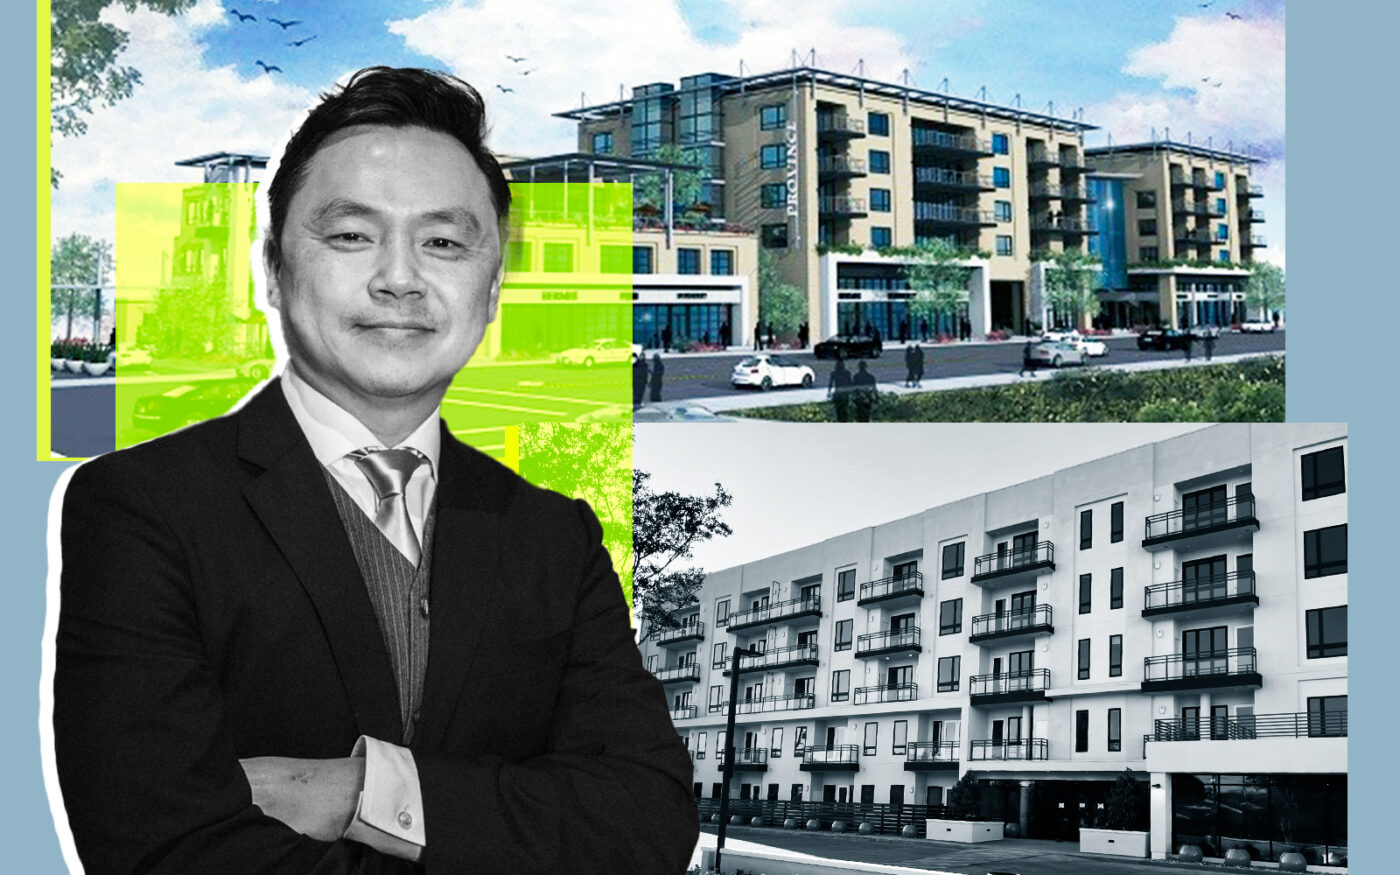 Chateau Operating Group's Eric Chen with a rendering and photo of the Province San Gabriel mixed use project